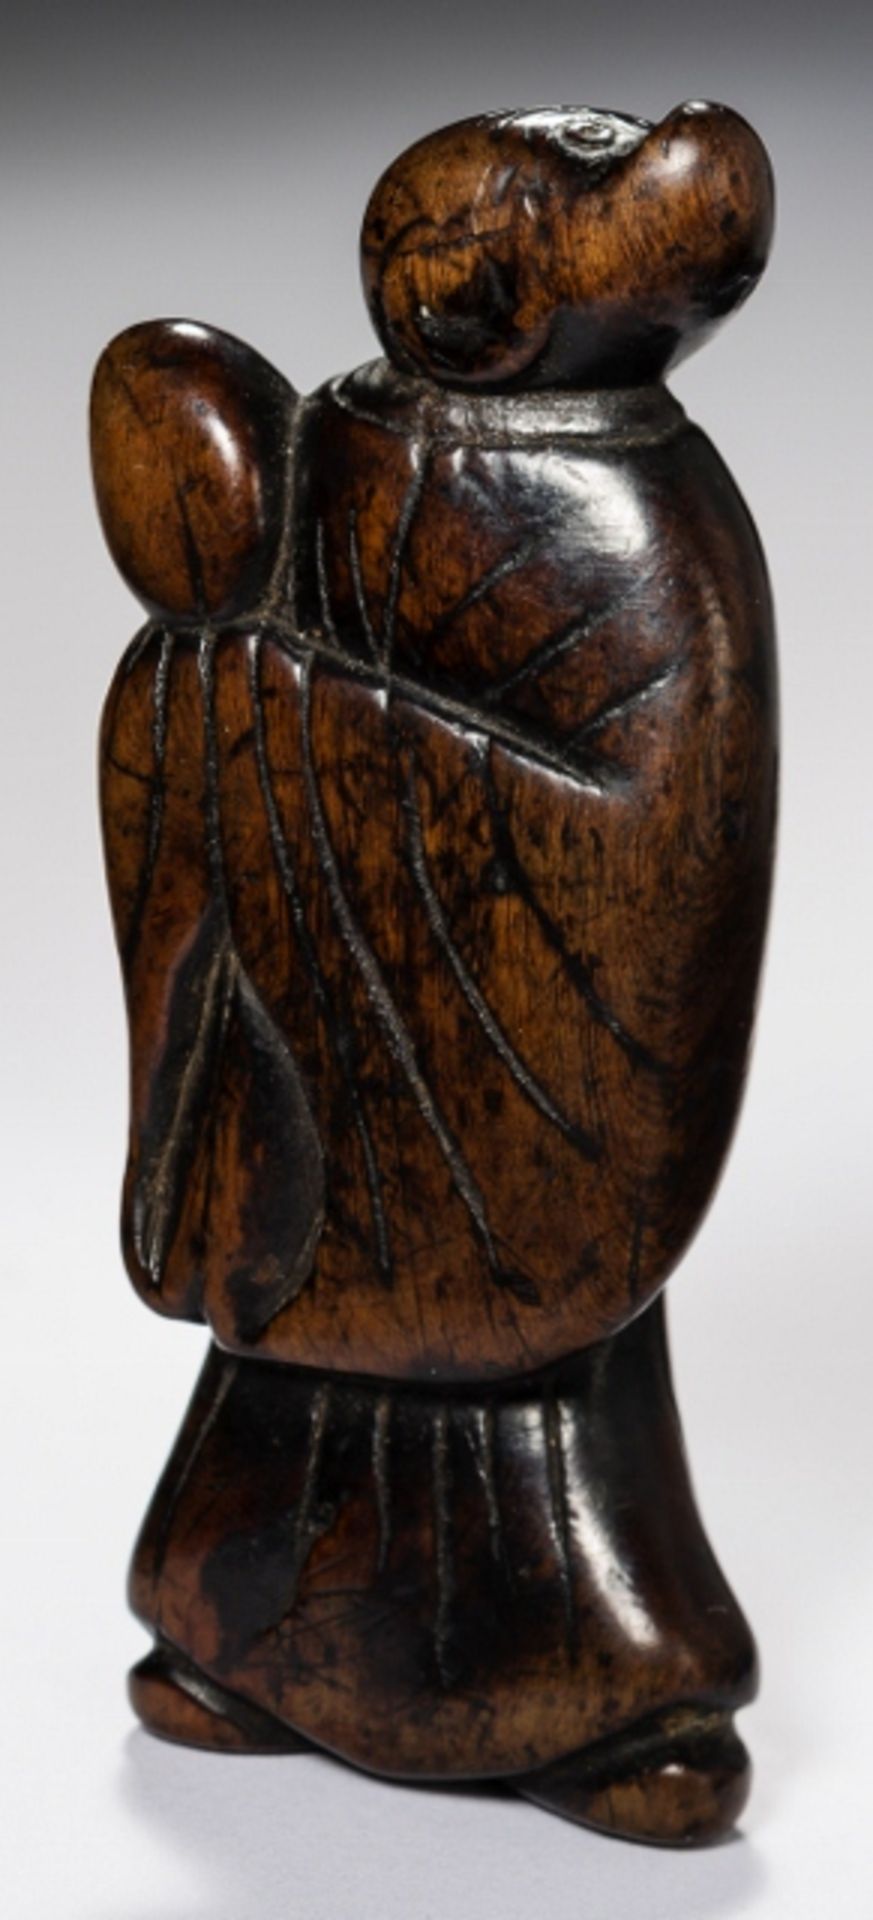 MONKEY SONGOKU WITH PEACH  Netsuke, wood. Japan, 18th cent.  An interesting depiction of the